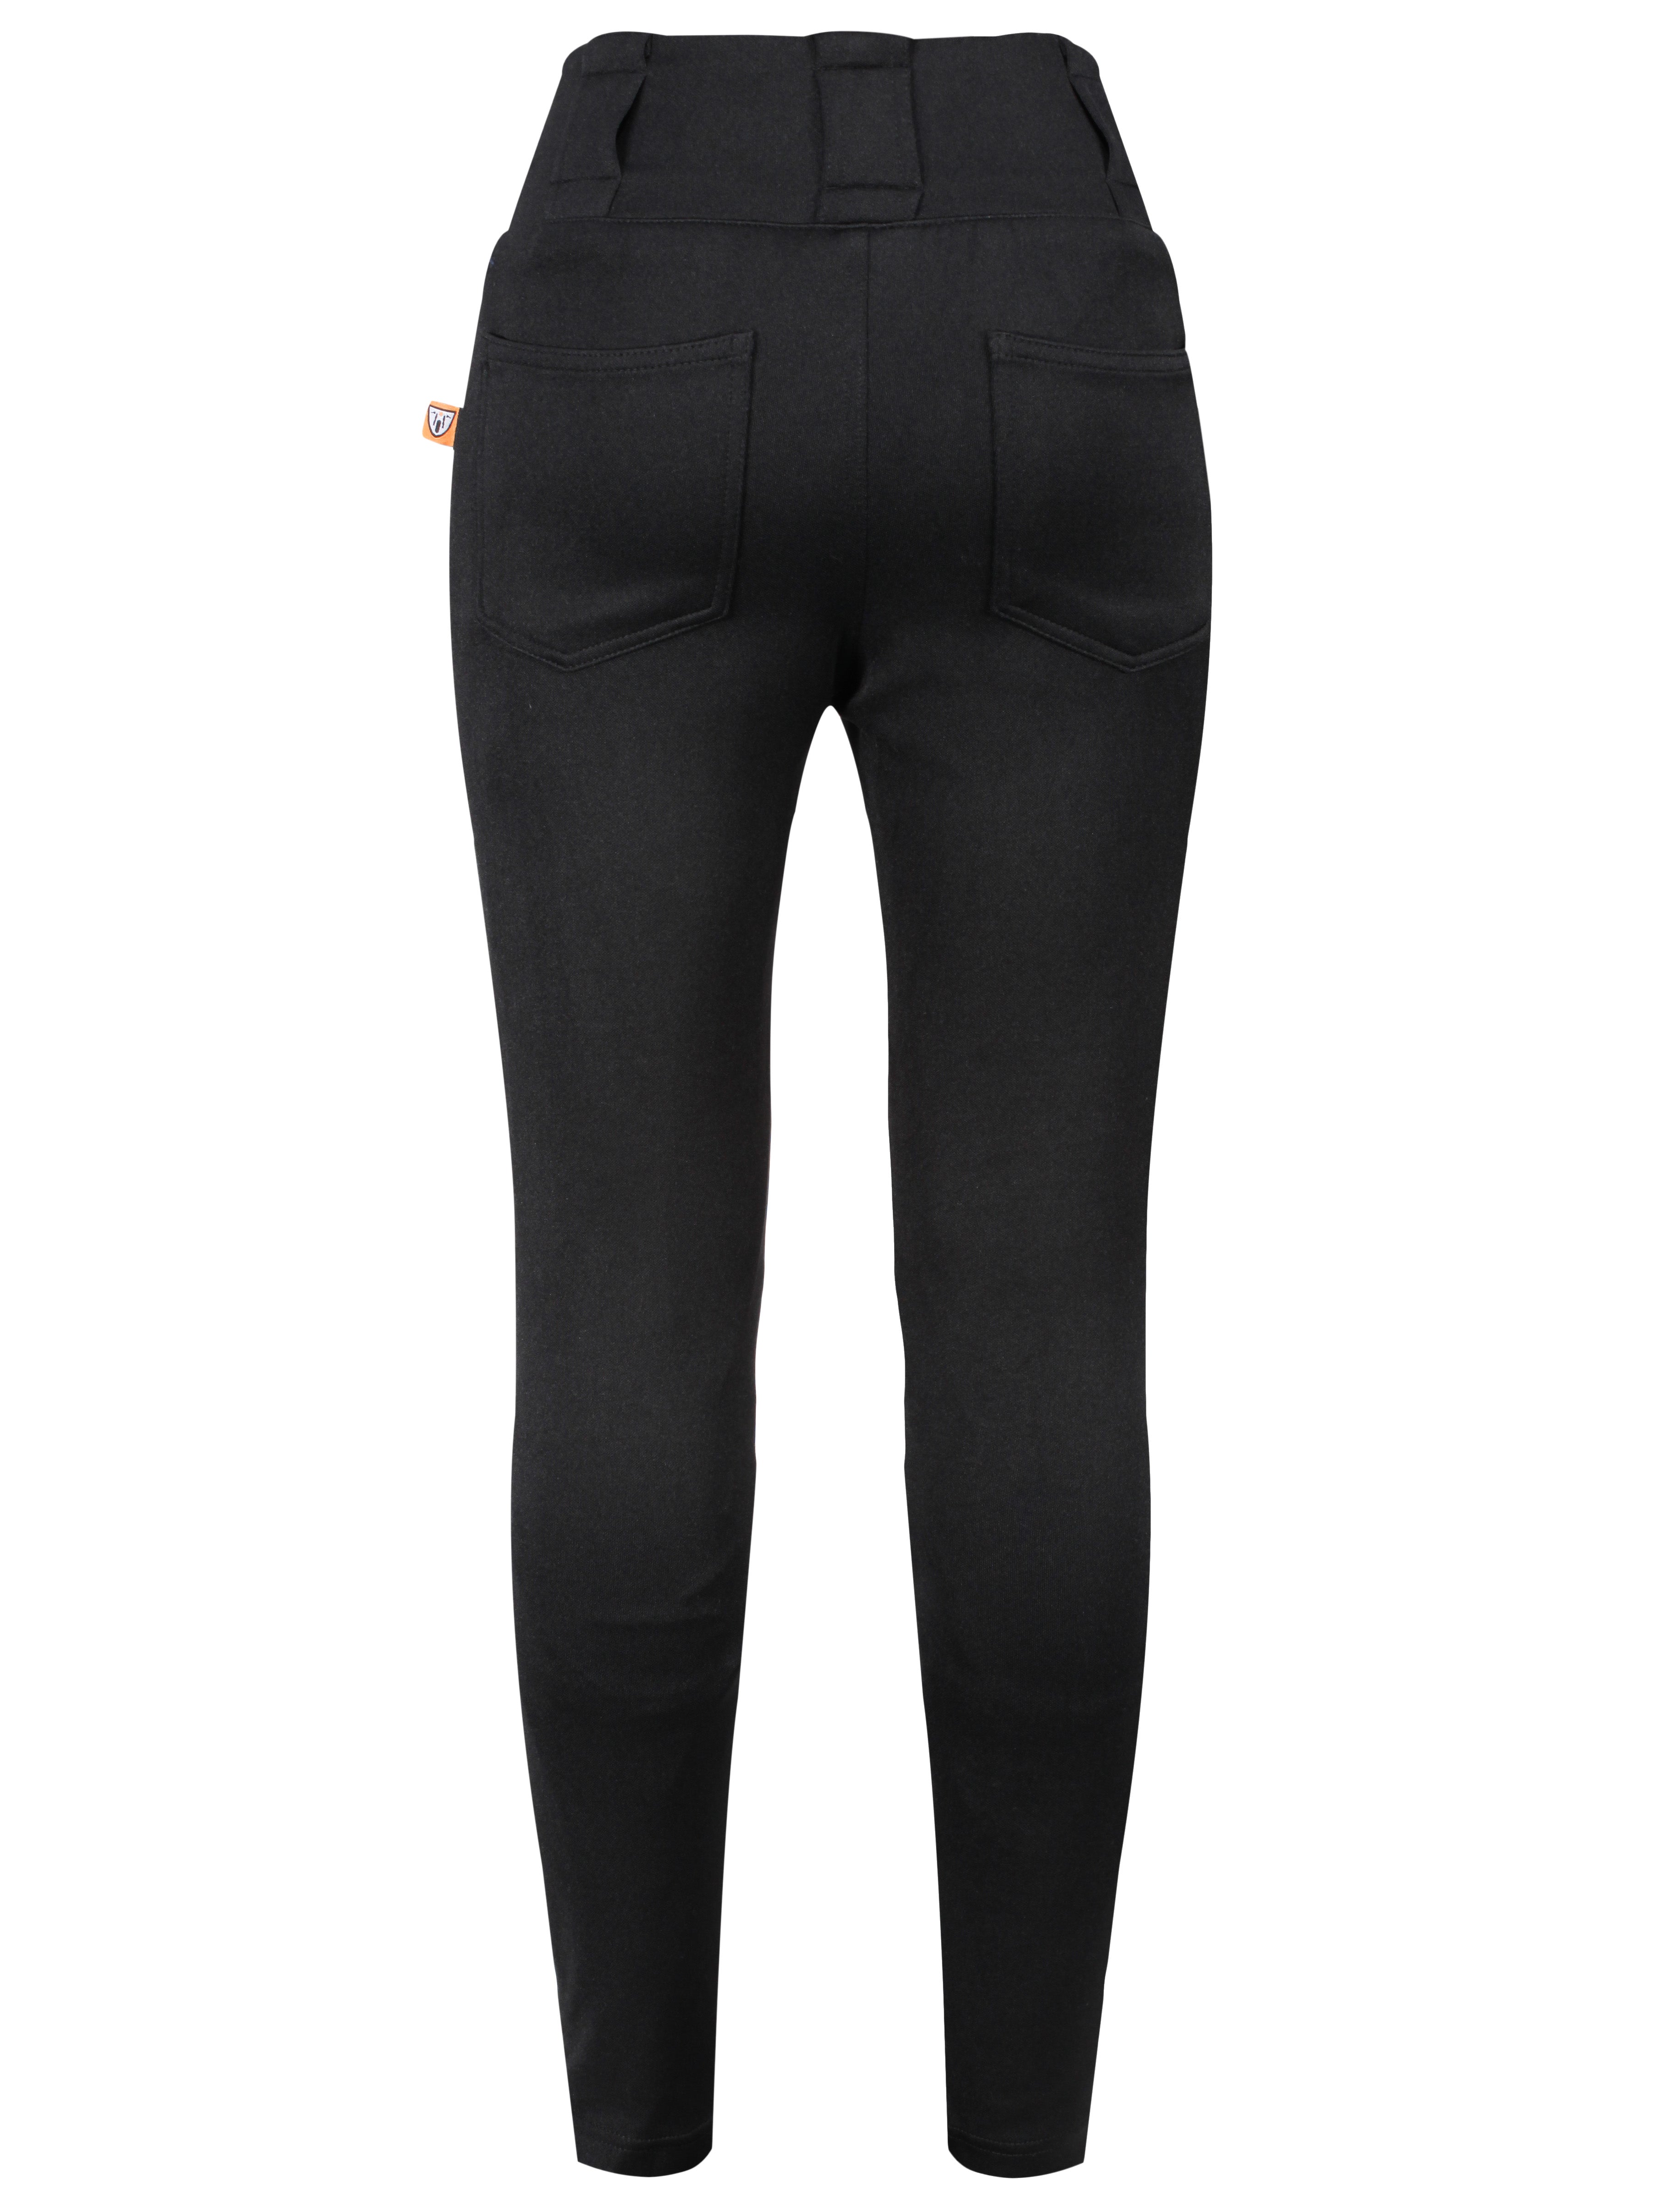 Black motorcycle leggings for women with high waist from the back